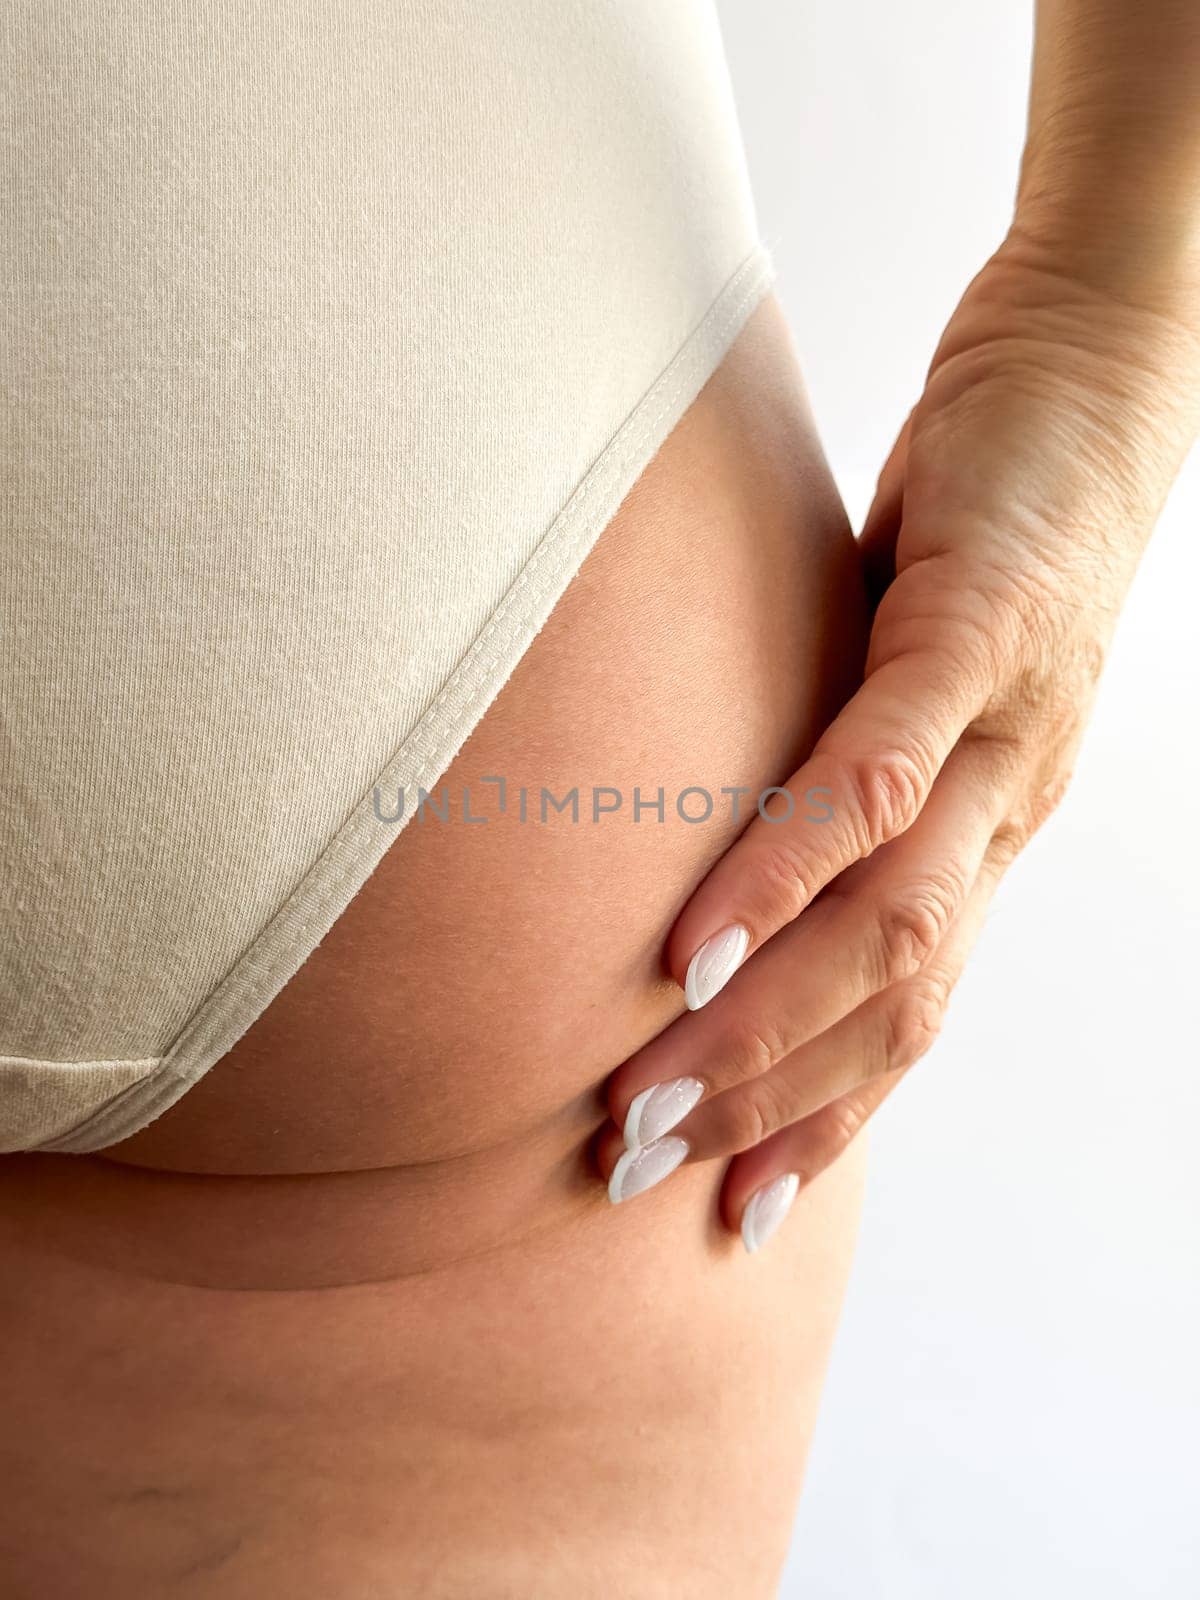 Close up of womans hand with white nails resting on her hip, wearing beige underwear. Focuses on skincare, body care, and personal hygiene, highlighting healthy skin and well groomed nails. by Lunnica